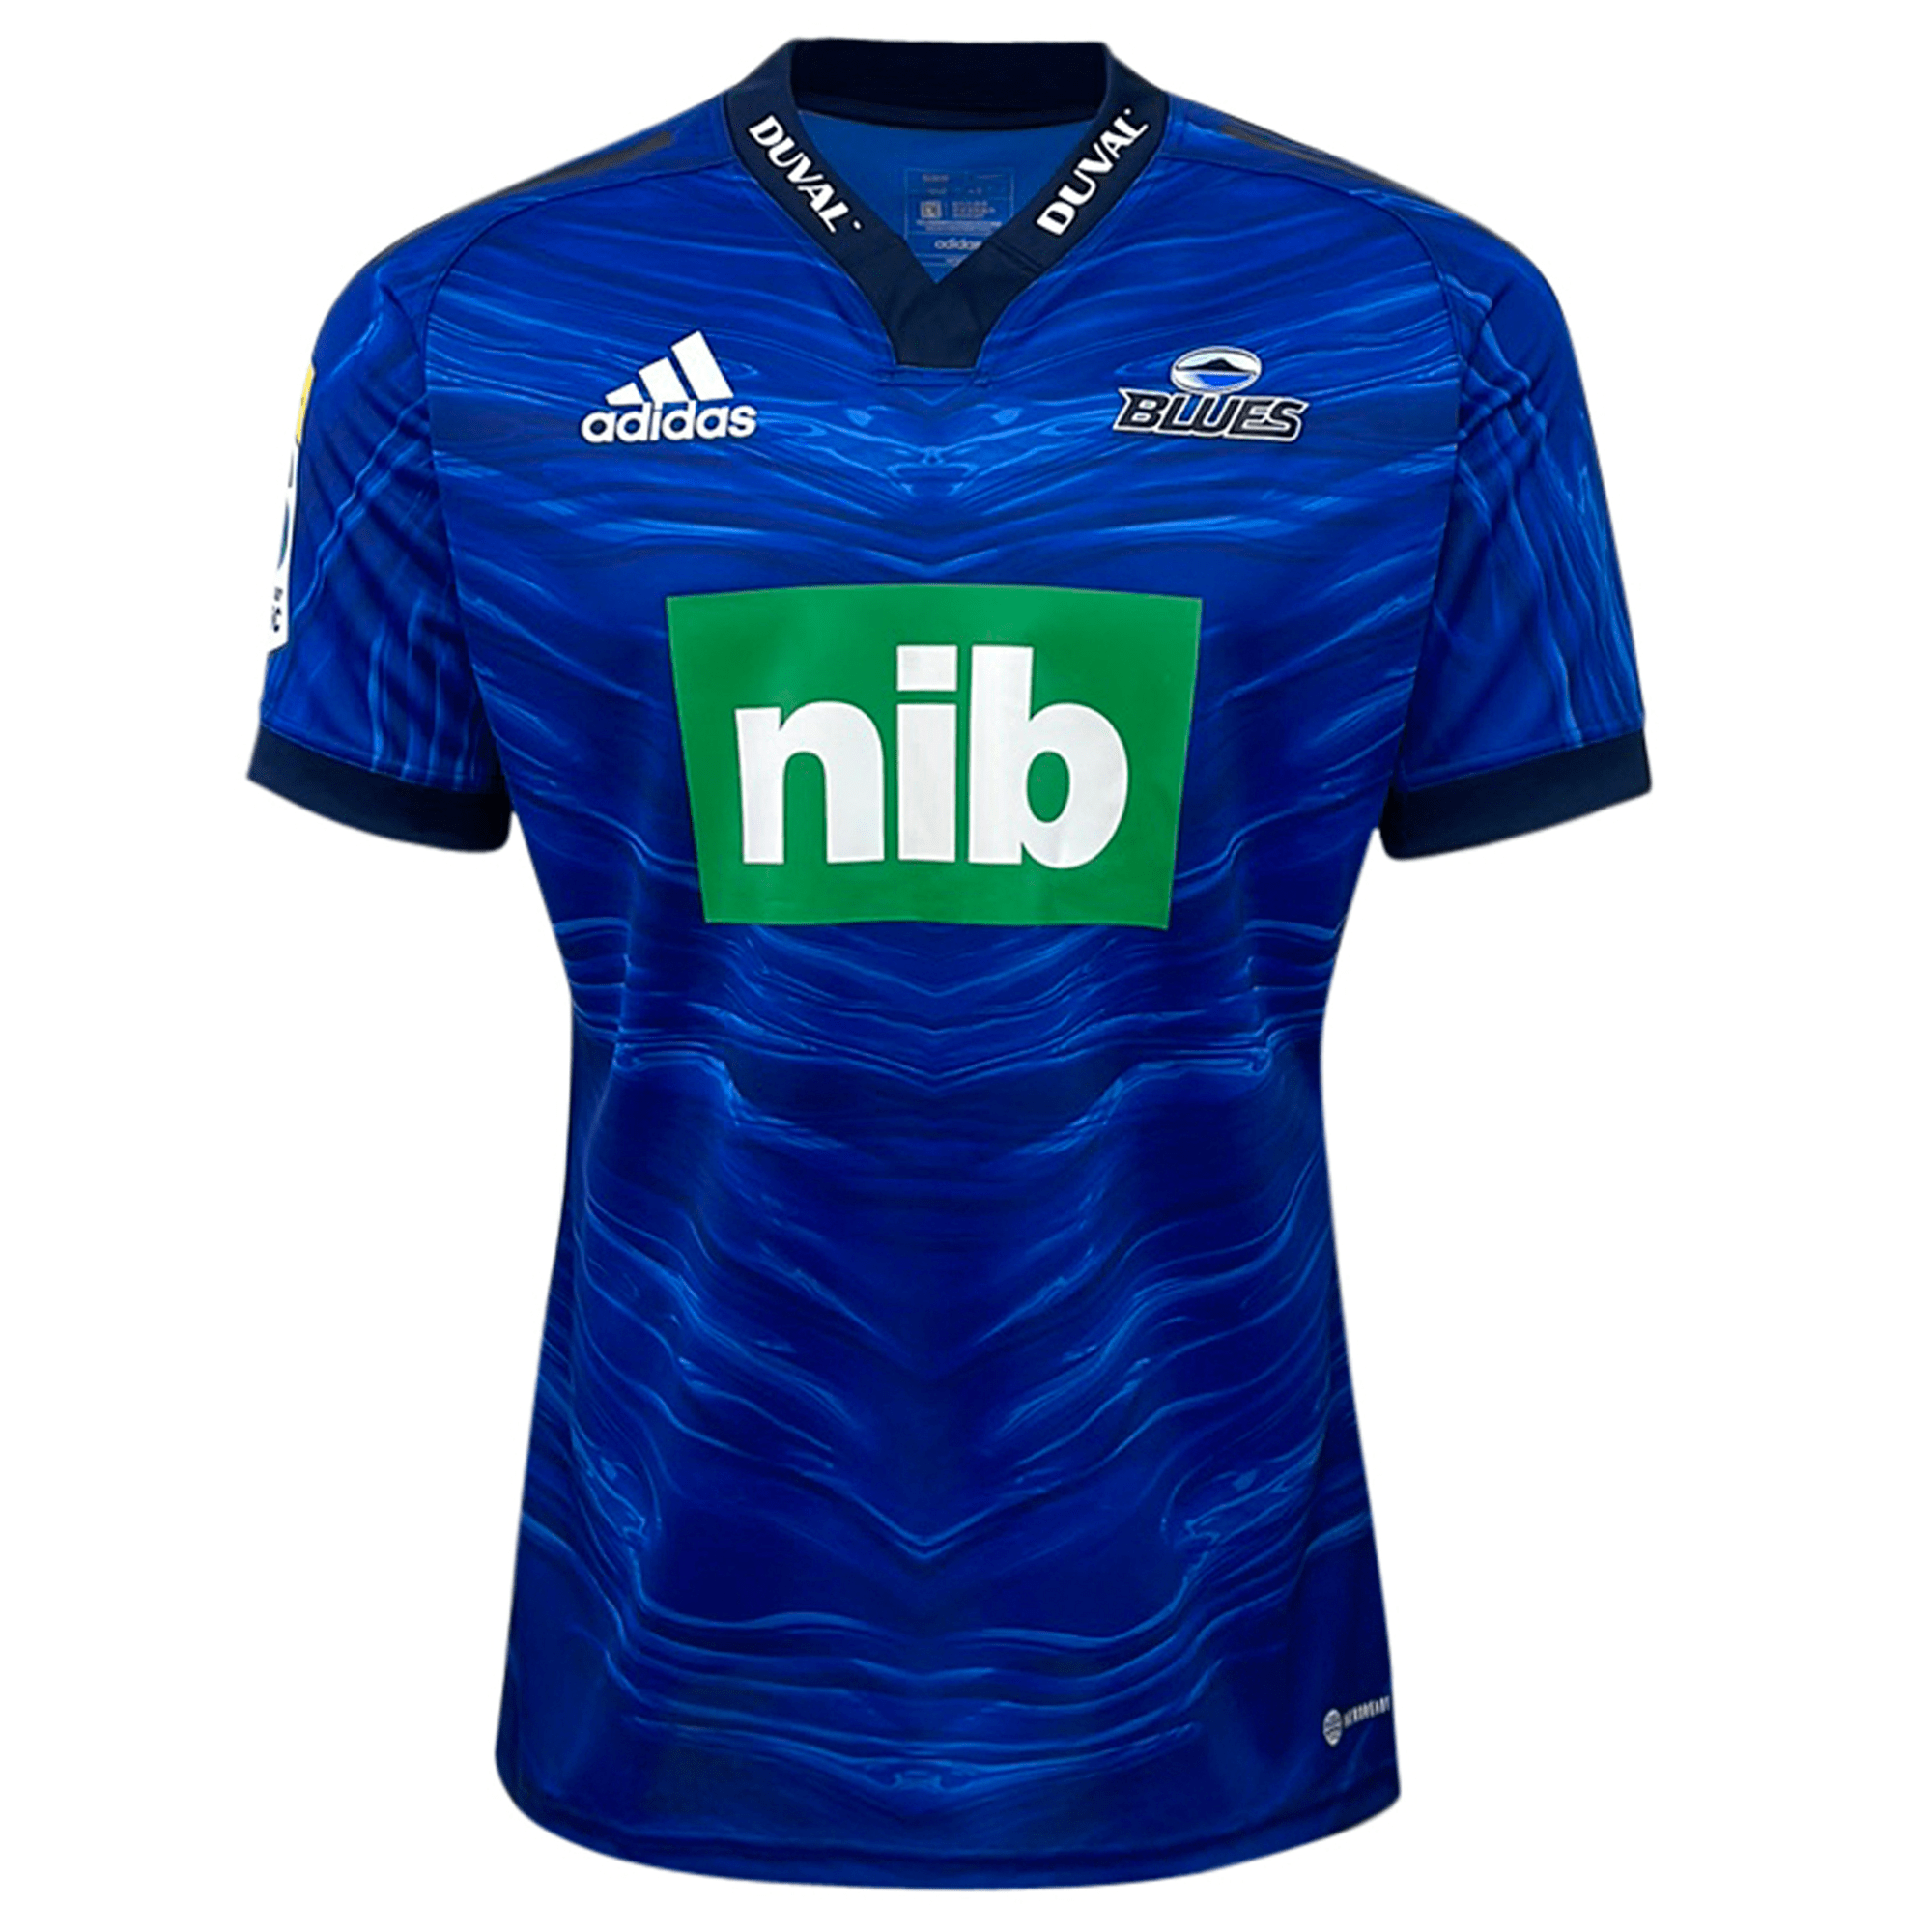 Blues Super Rugby Jerseys, Crusaders Super Rugby Jerseys